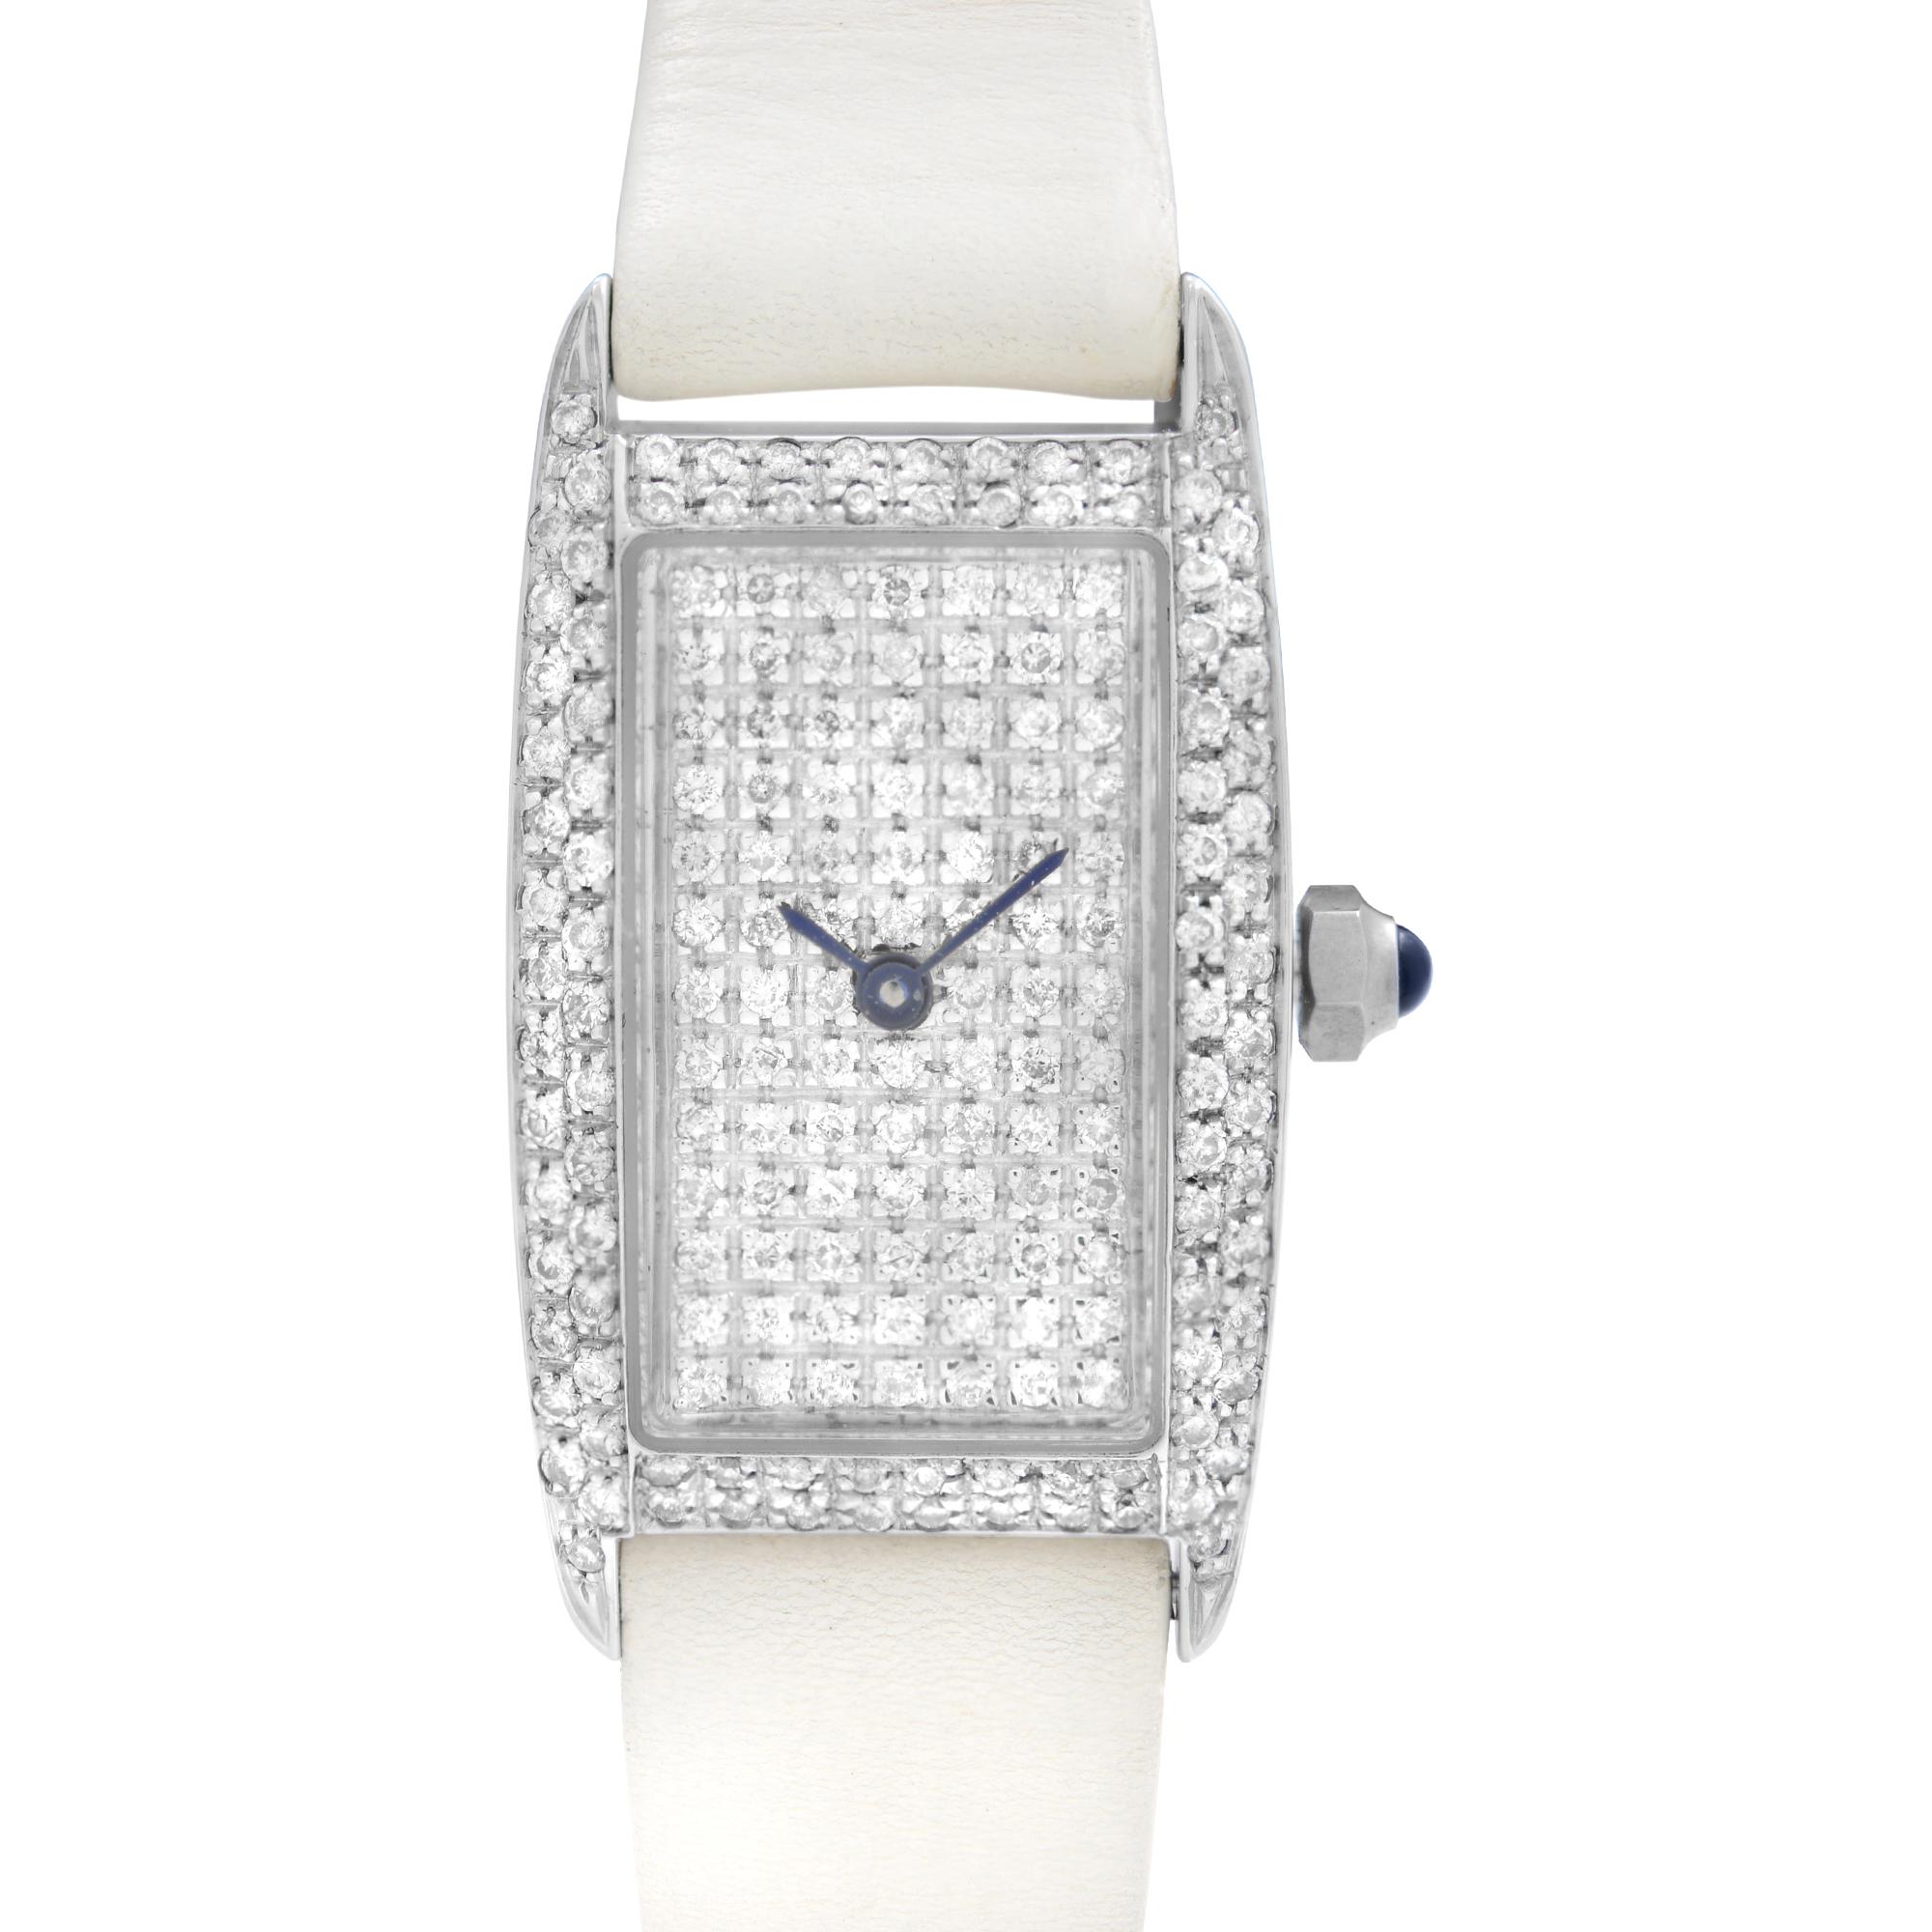 Pre Owned Vicence Milor 14K White Gold Diamond Dial White Leather Strap Ladies Watch. approx 2-carat Diamonds.  This Beautiful Timepiece is Powered by Quartz (Battery) Movement And Features: Rectangular 14k White Golf Case with a White Leather Strap